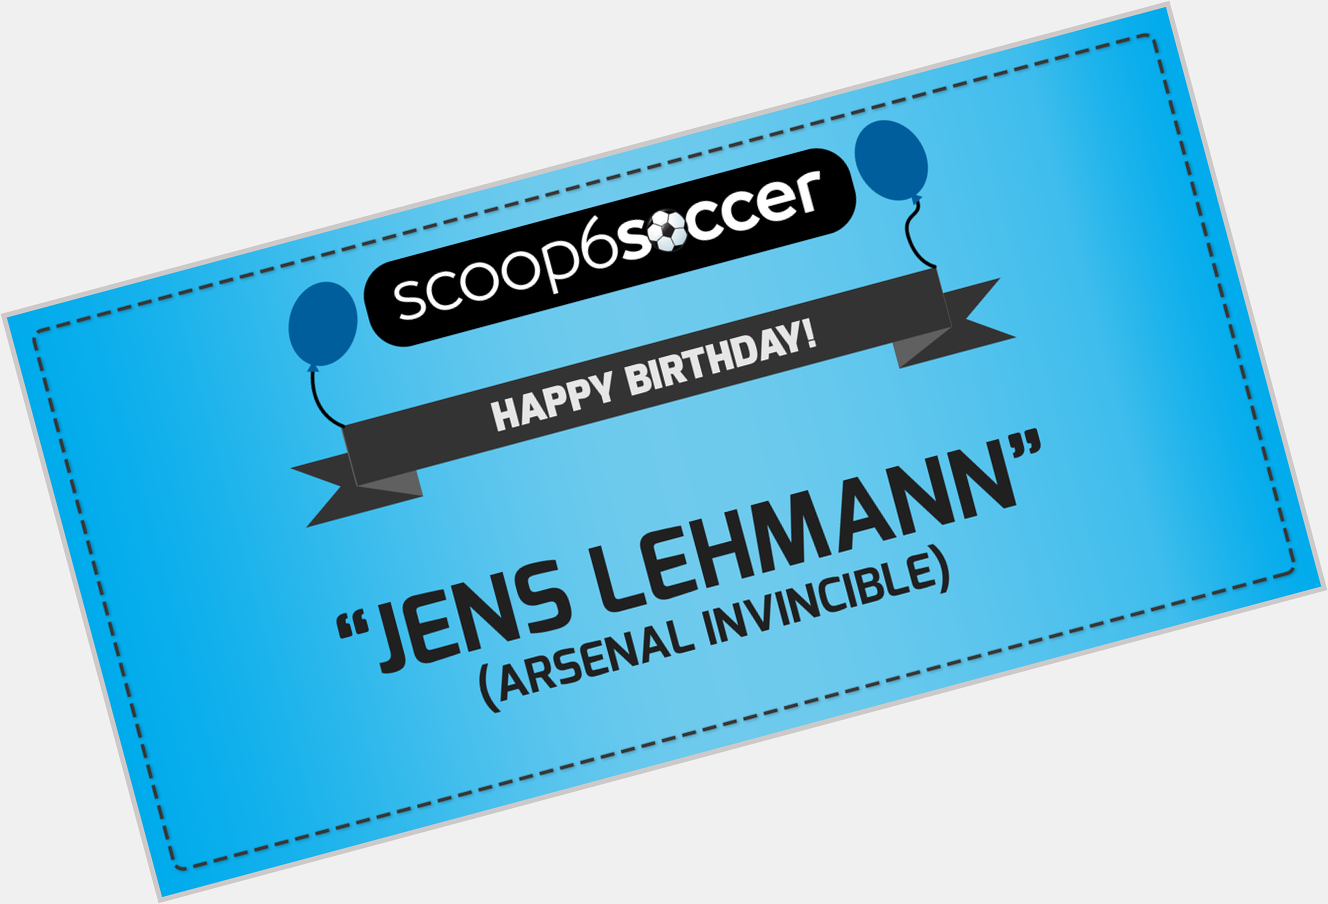 Q: How many league games did Jens Lehmann lose in 2003/04? A: None; Happy 46th birthday! 